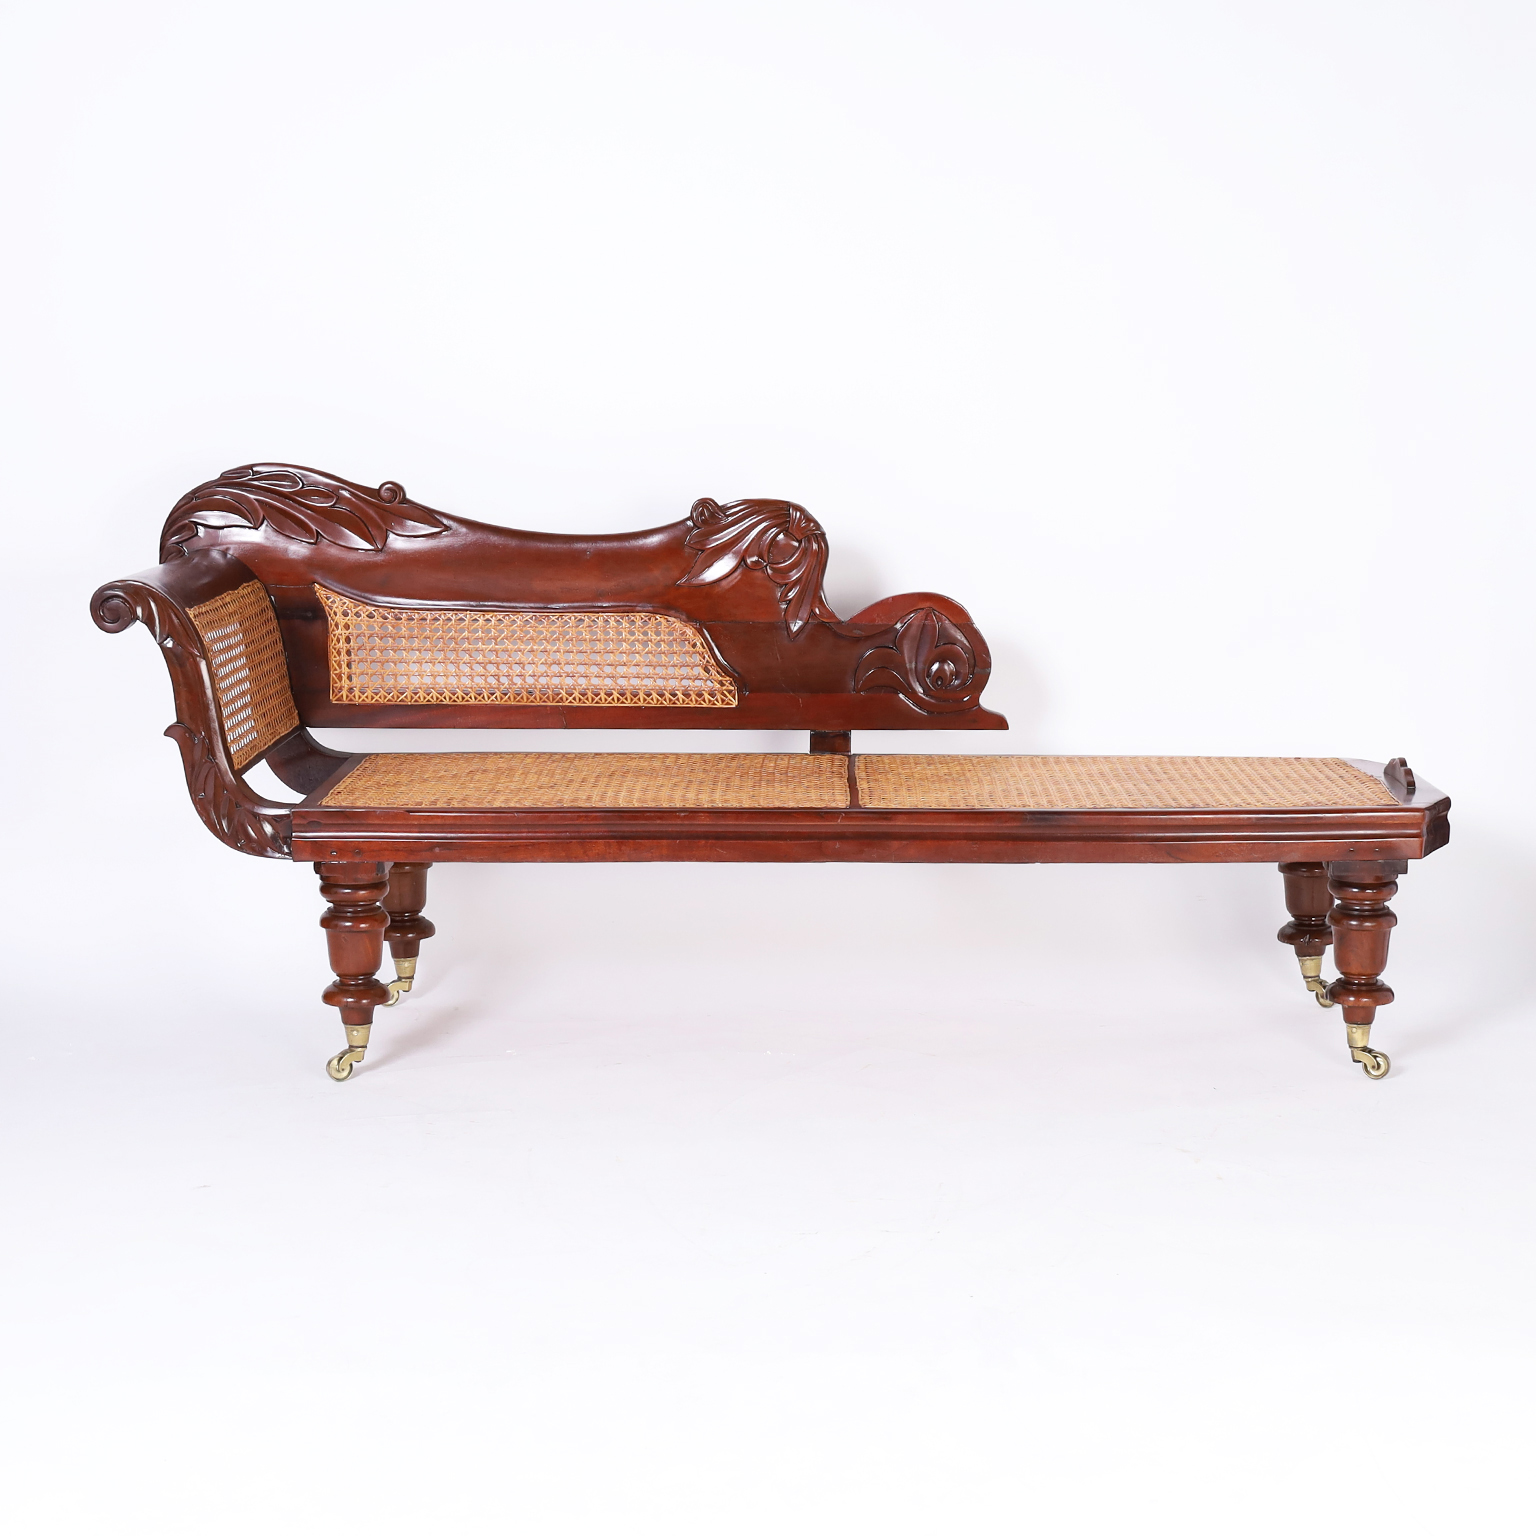 Antique West Indies Carved and Caned Daybed or Chaise Lounge